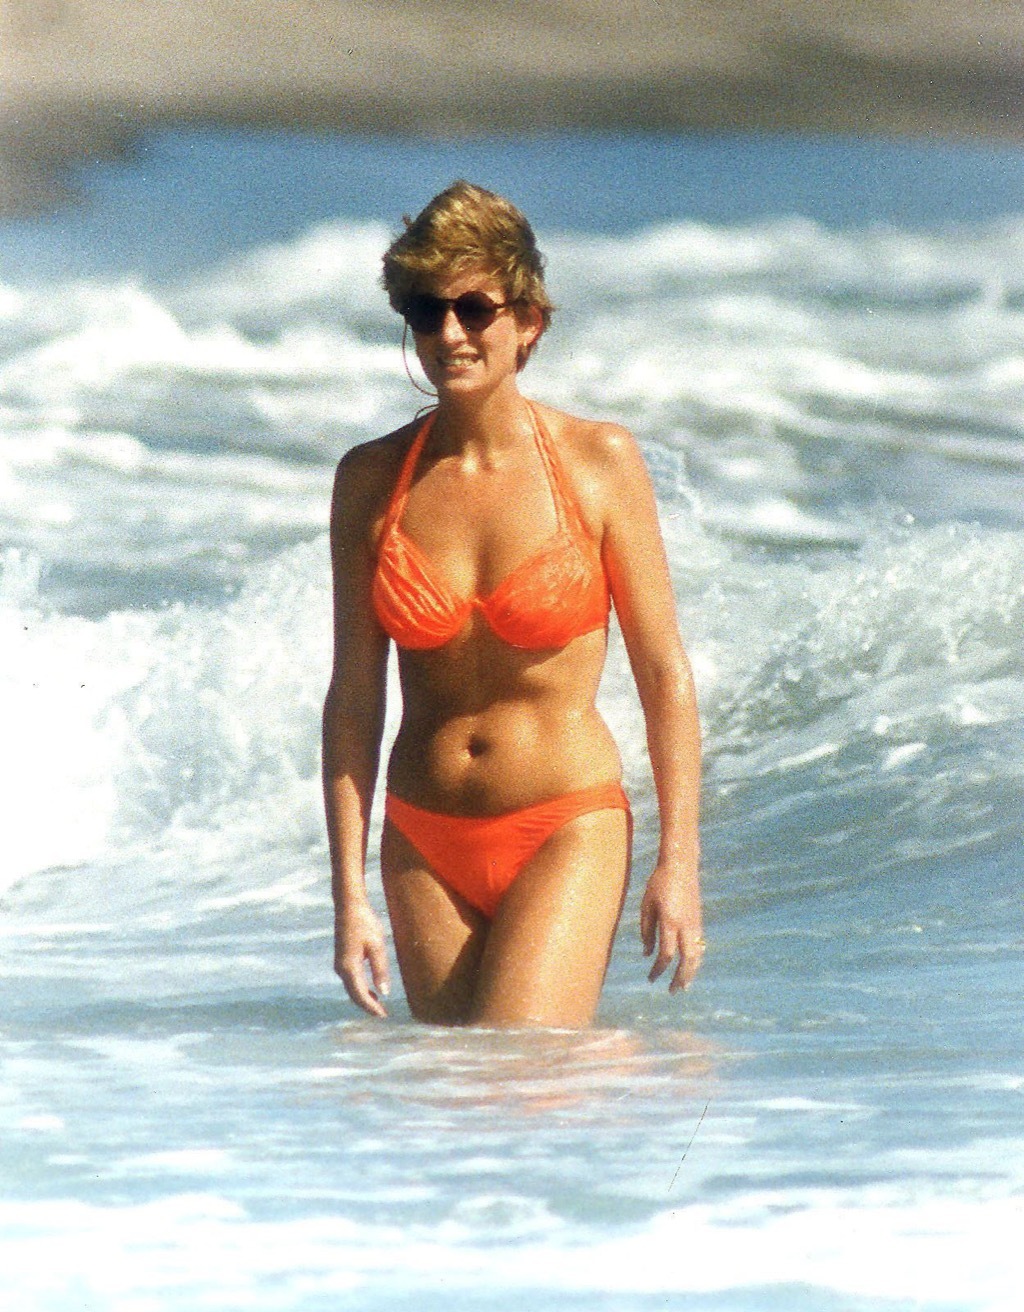 Princess Diana in a bathing suit